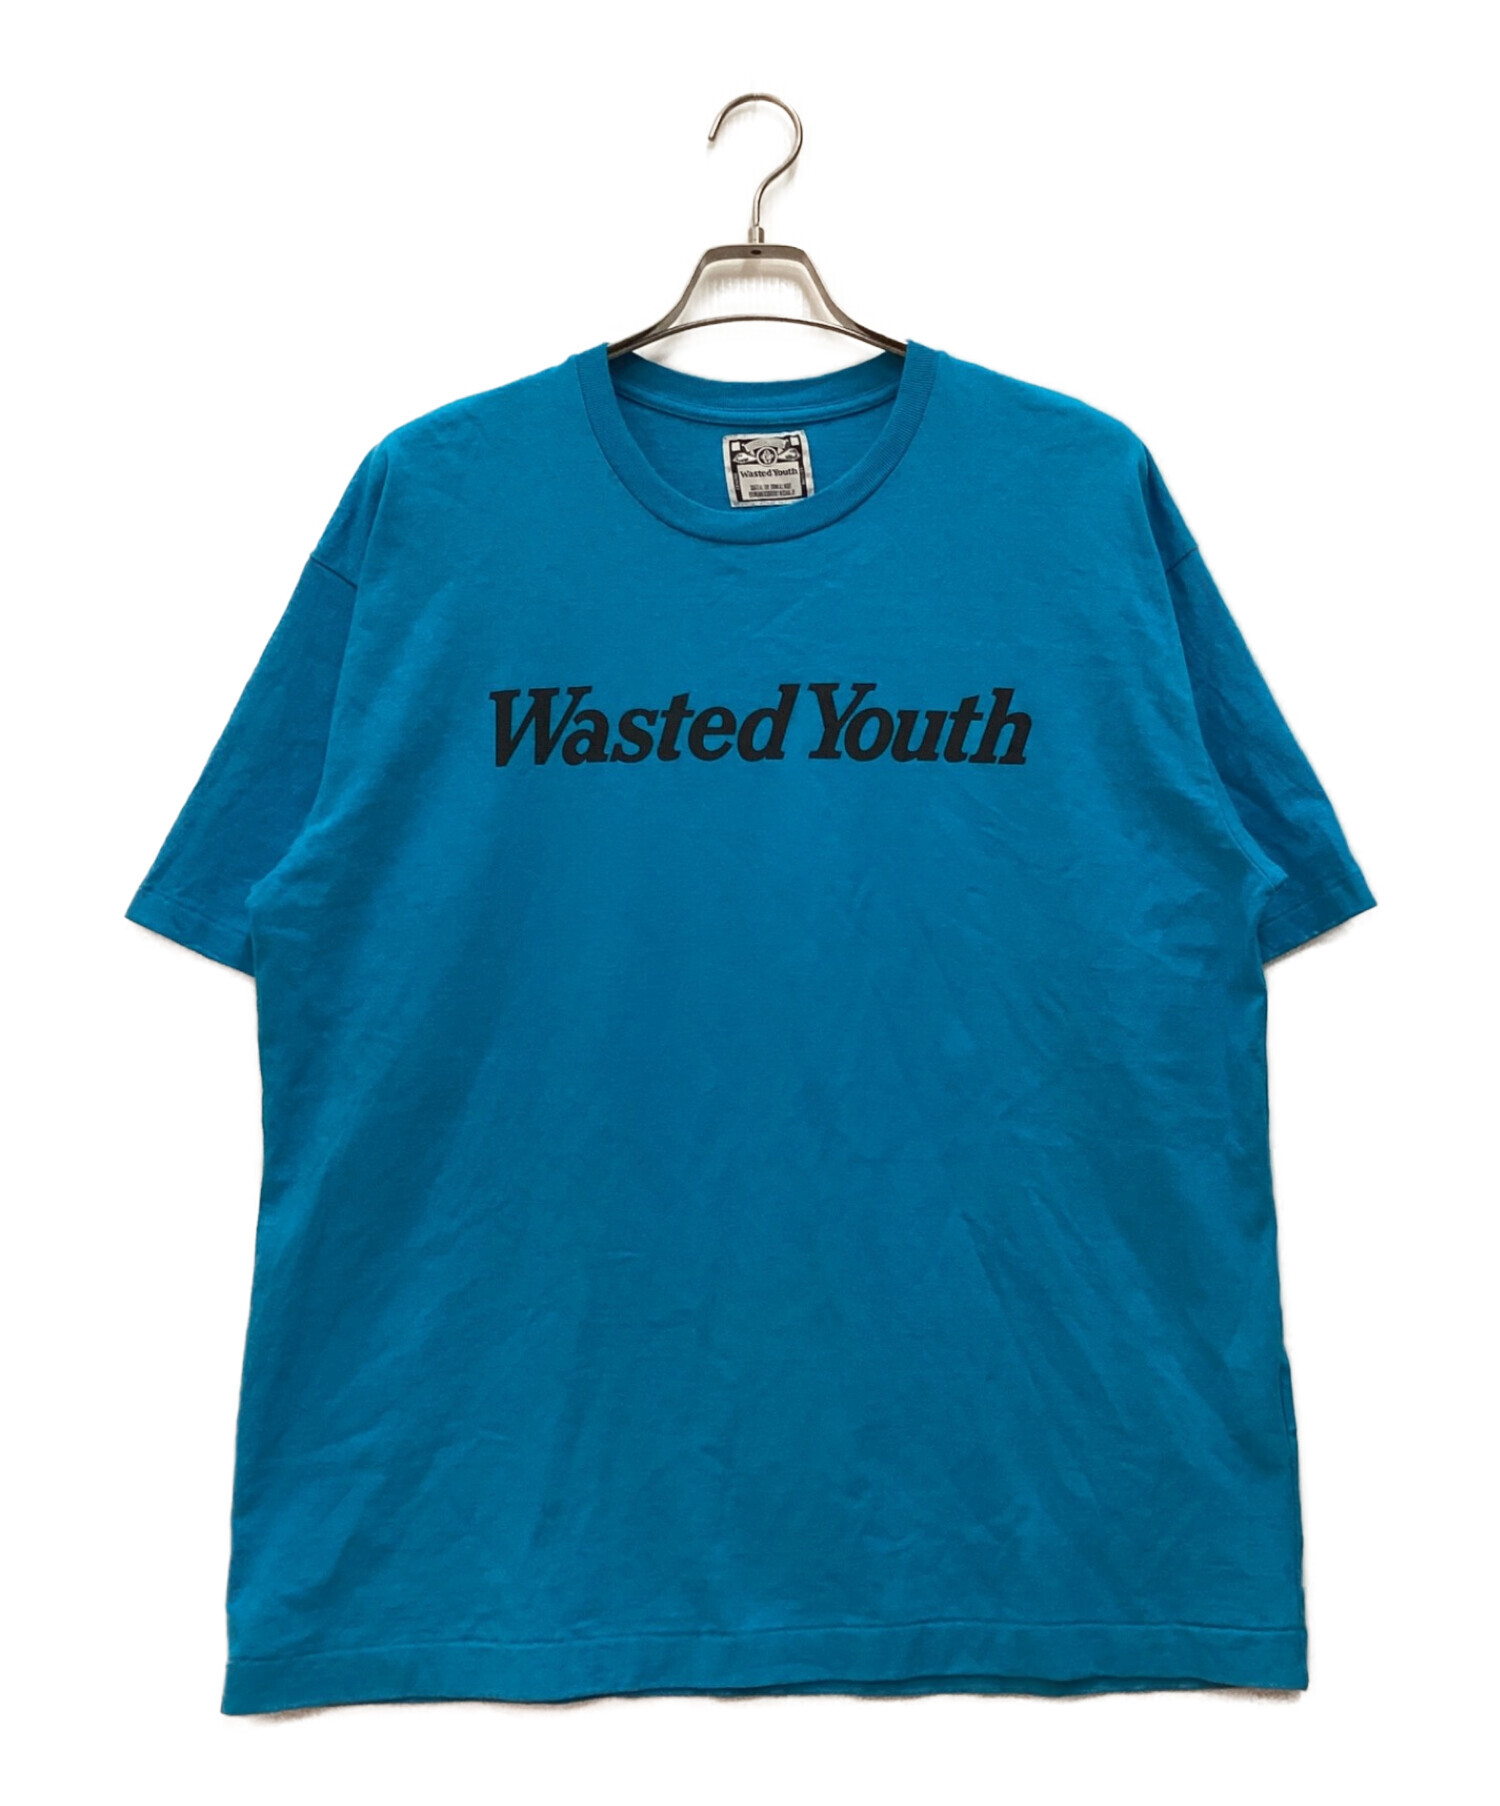 wasted youth 新品未使用品トップス